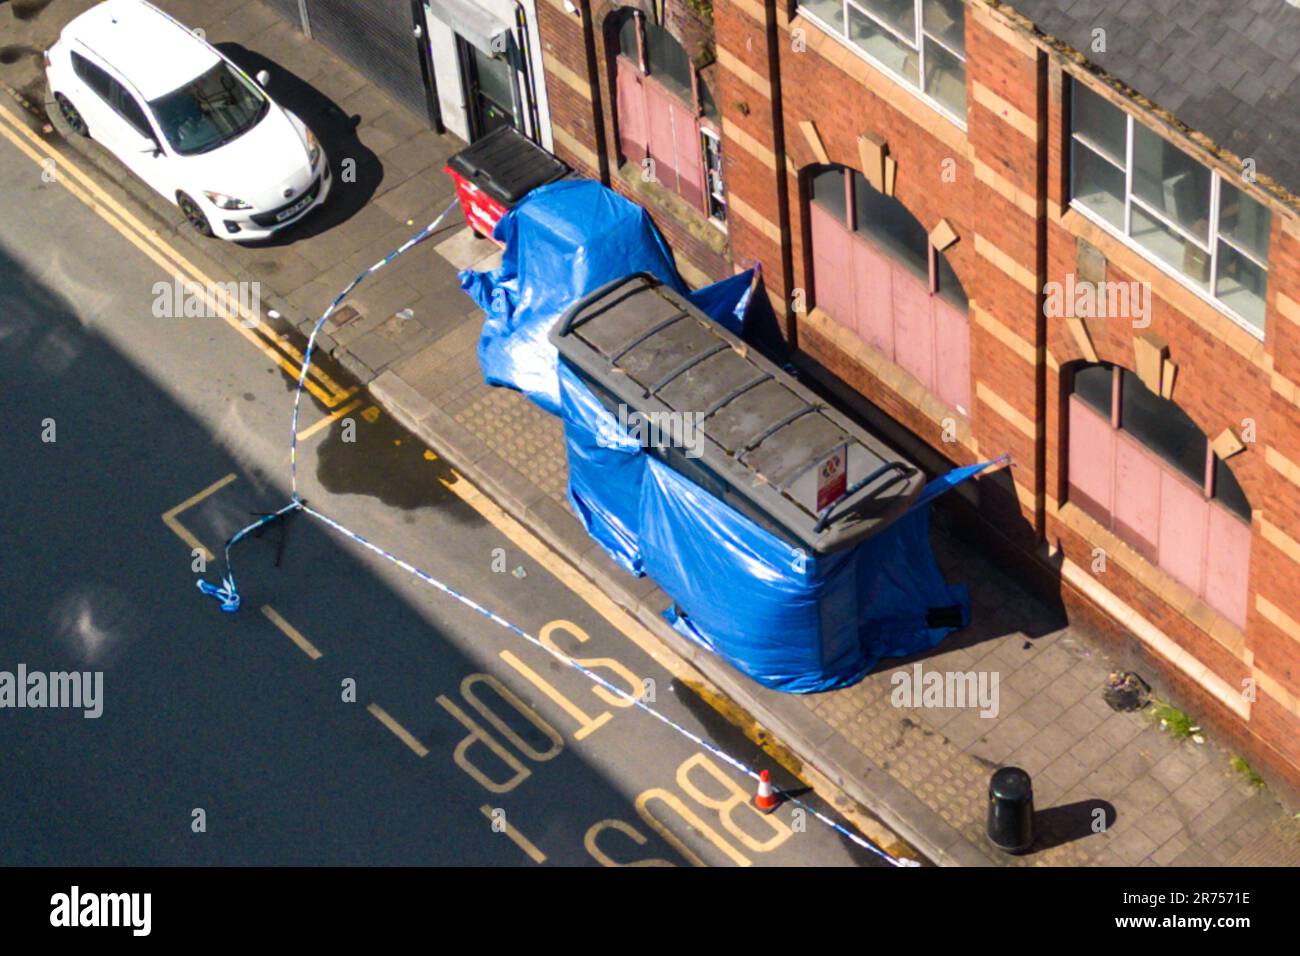 Hunters Road, Hockley, Birmingham 13th June 2023 - West Midlands Police on Hunters Road after a 41-year-old man was stabbed to death at a Birmingham bus stop on Monday evening. A forensic officer was seen using a scanner to map the crime scene in the Hockley area of the city. Officers have arrested two people. Paramedics called police to Hunters Road in Hockley just after 8pm yesterday, but despite their efforts the 41-year-old man died at the scene. His family has been informed. Credit: Stop Press Media/Alamy Live News Stock Photo